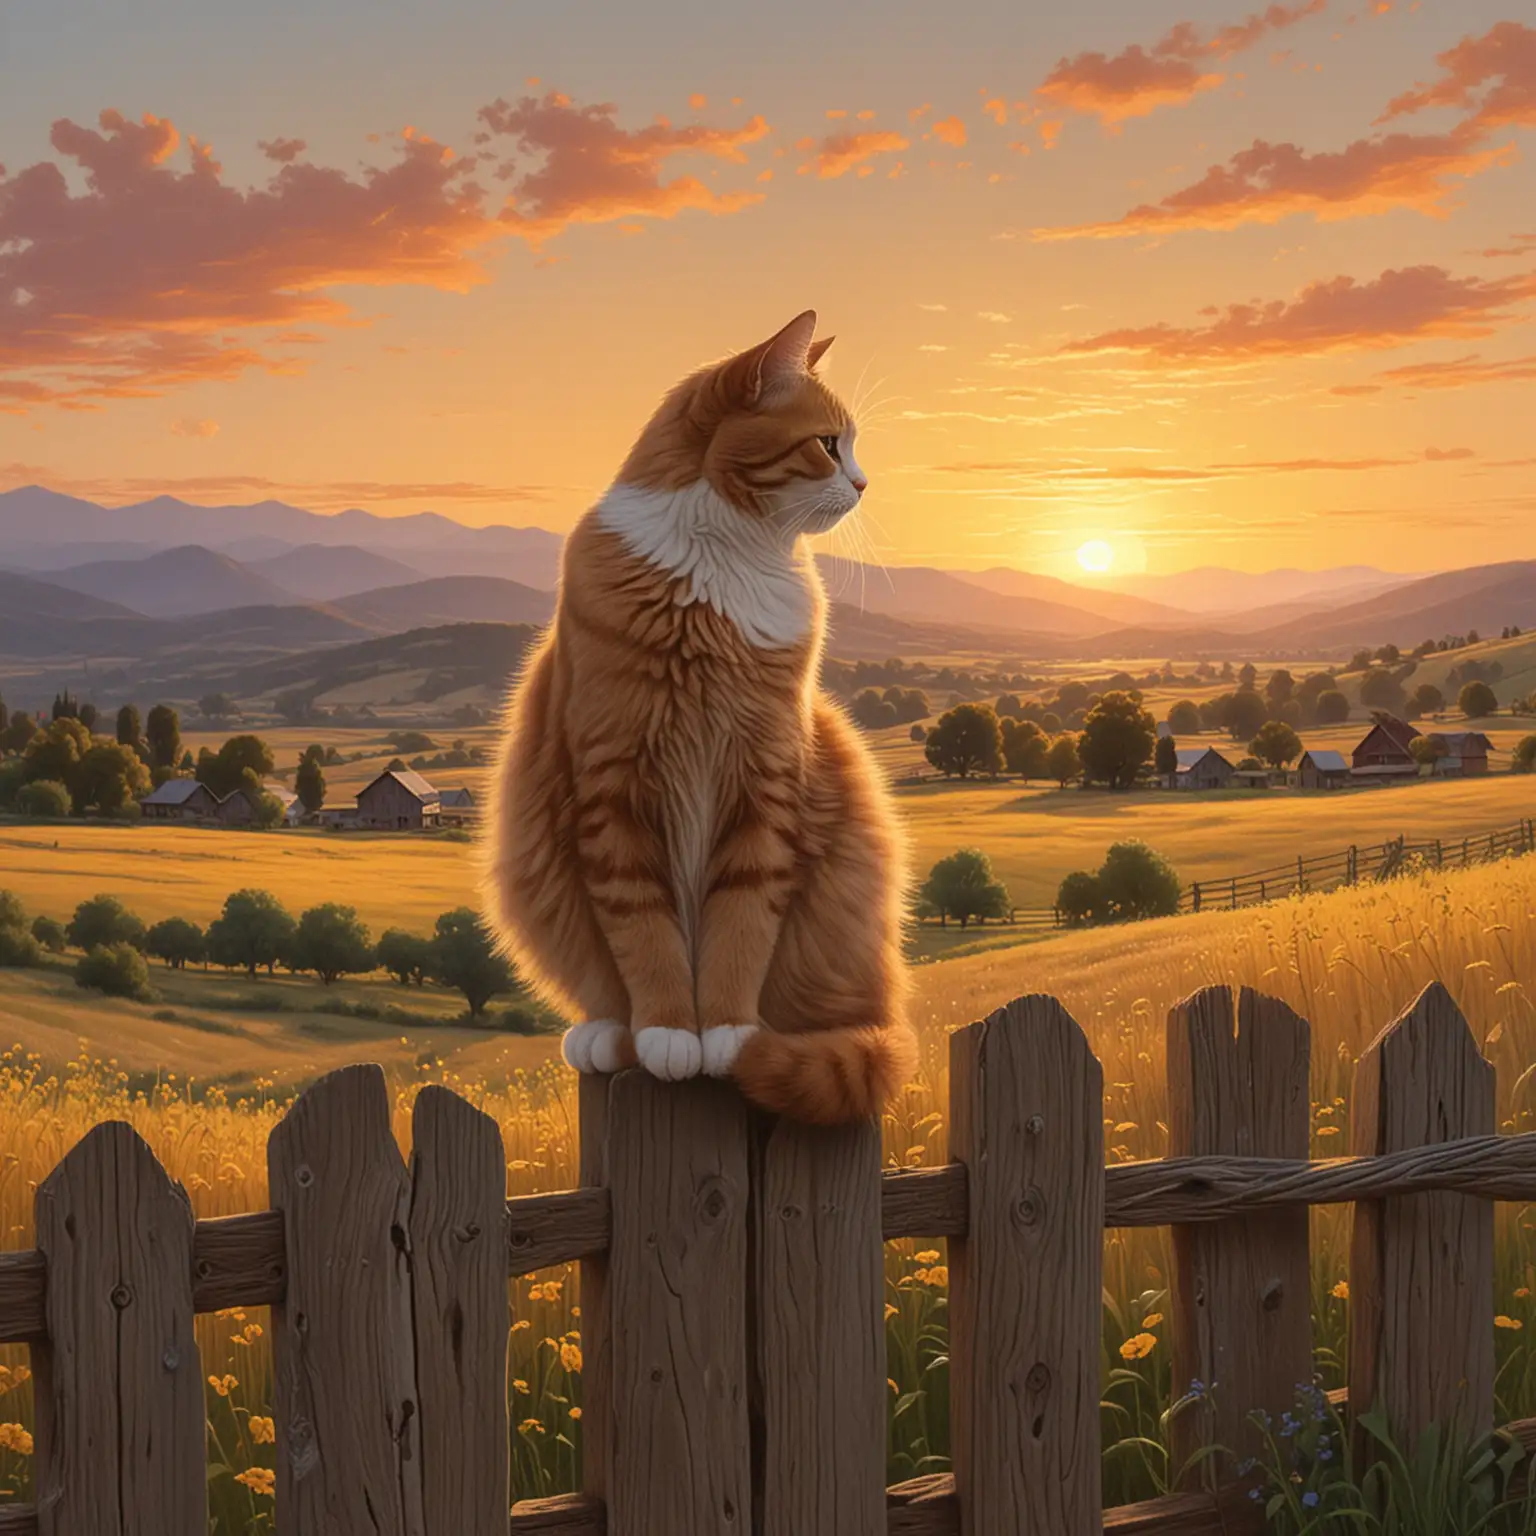 /imagine prompt: An adorable cat perched on a rustic wooden fence, overlooking a serene countryside landscape, golden fields rolling into the distance, a gentle breeze ruffling its fur, distant mountains silhouetted against the setting sun, conveying a sense of peaceful solitude and contemplation, Artwork, pastel drawing on toned paper, emphasizing the cat's connection to the tranquil rural setting, --ar 16:9 --v 5